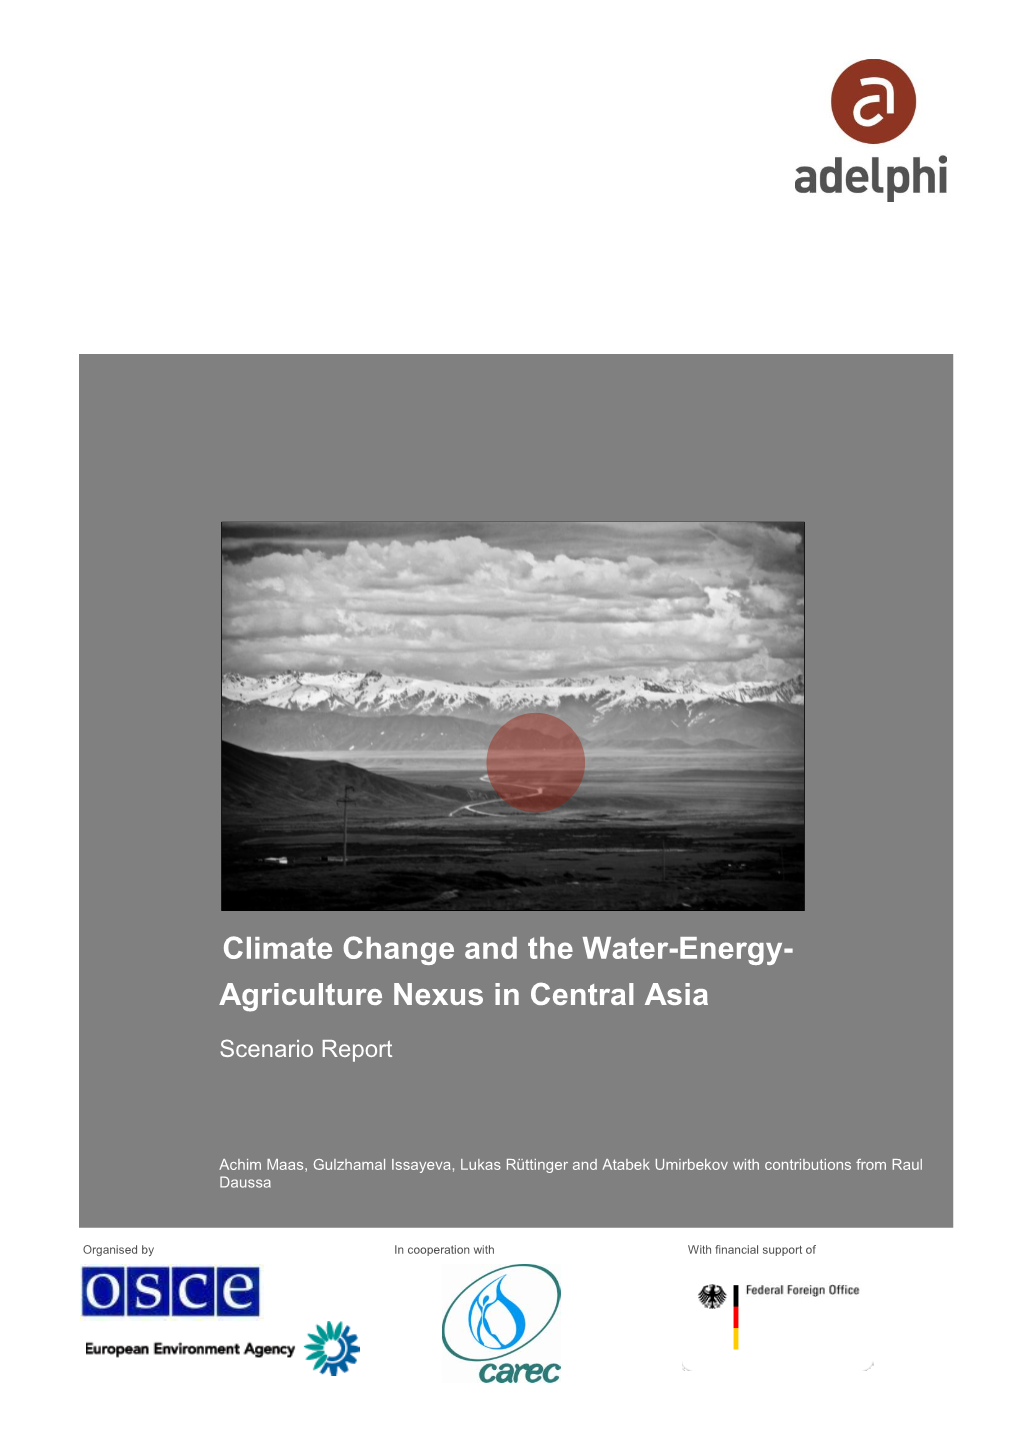 Climate Change and the Water-Energy- Agriculture Nexus in Central Asia